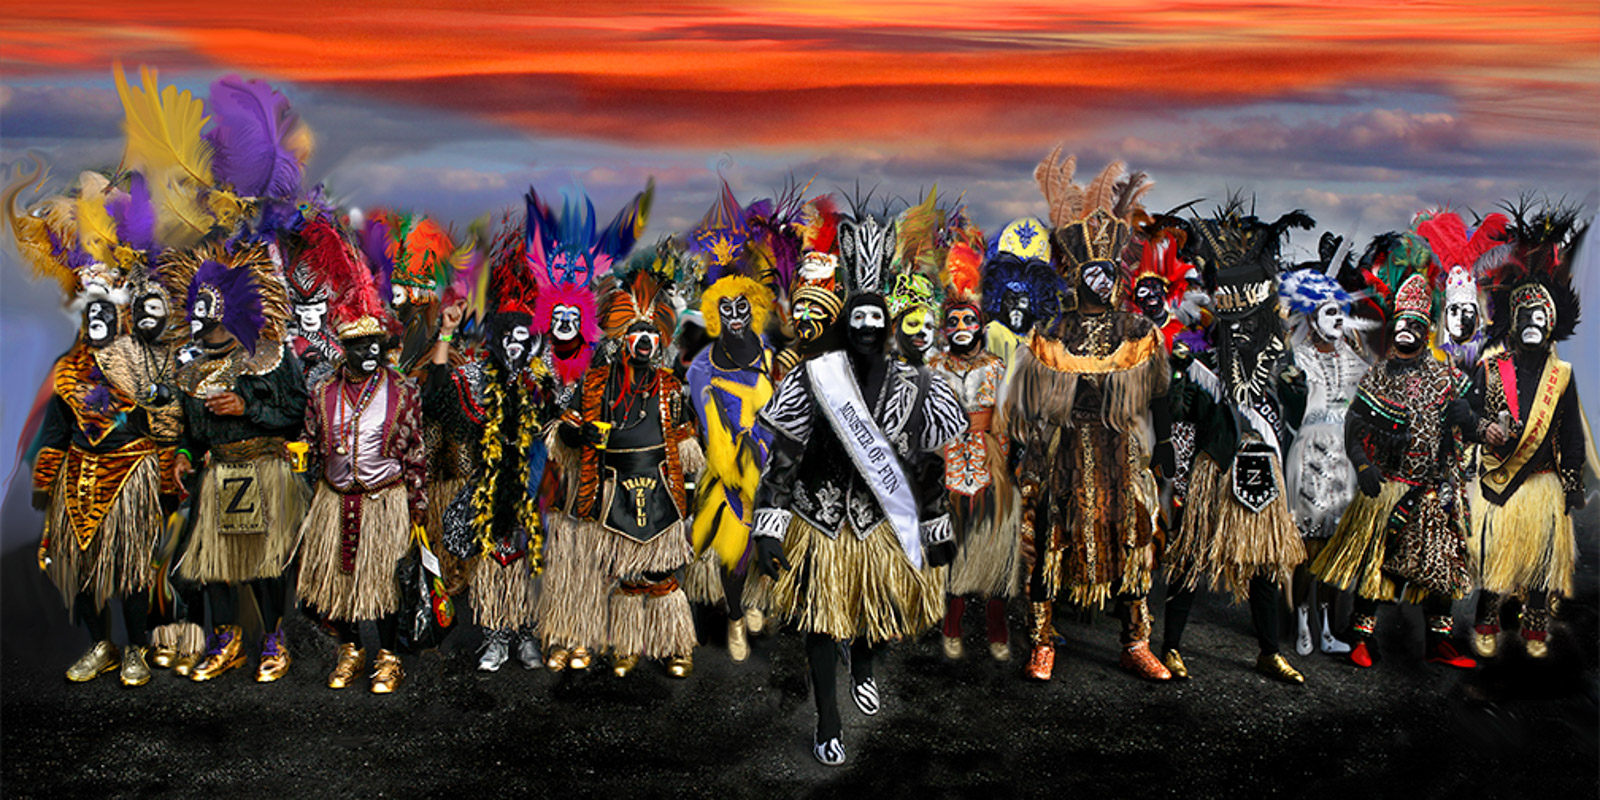 A collage of Zulu walking characters by photo artist Lisa DuBois